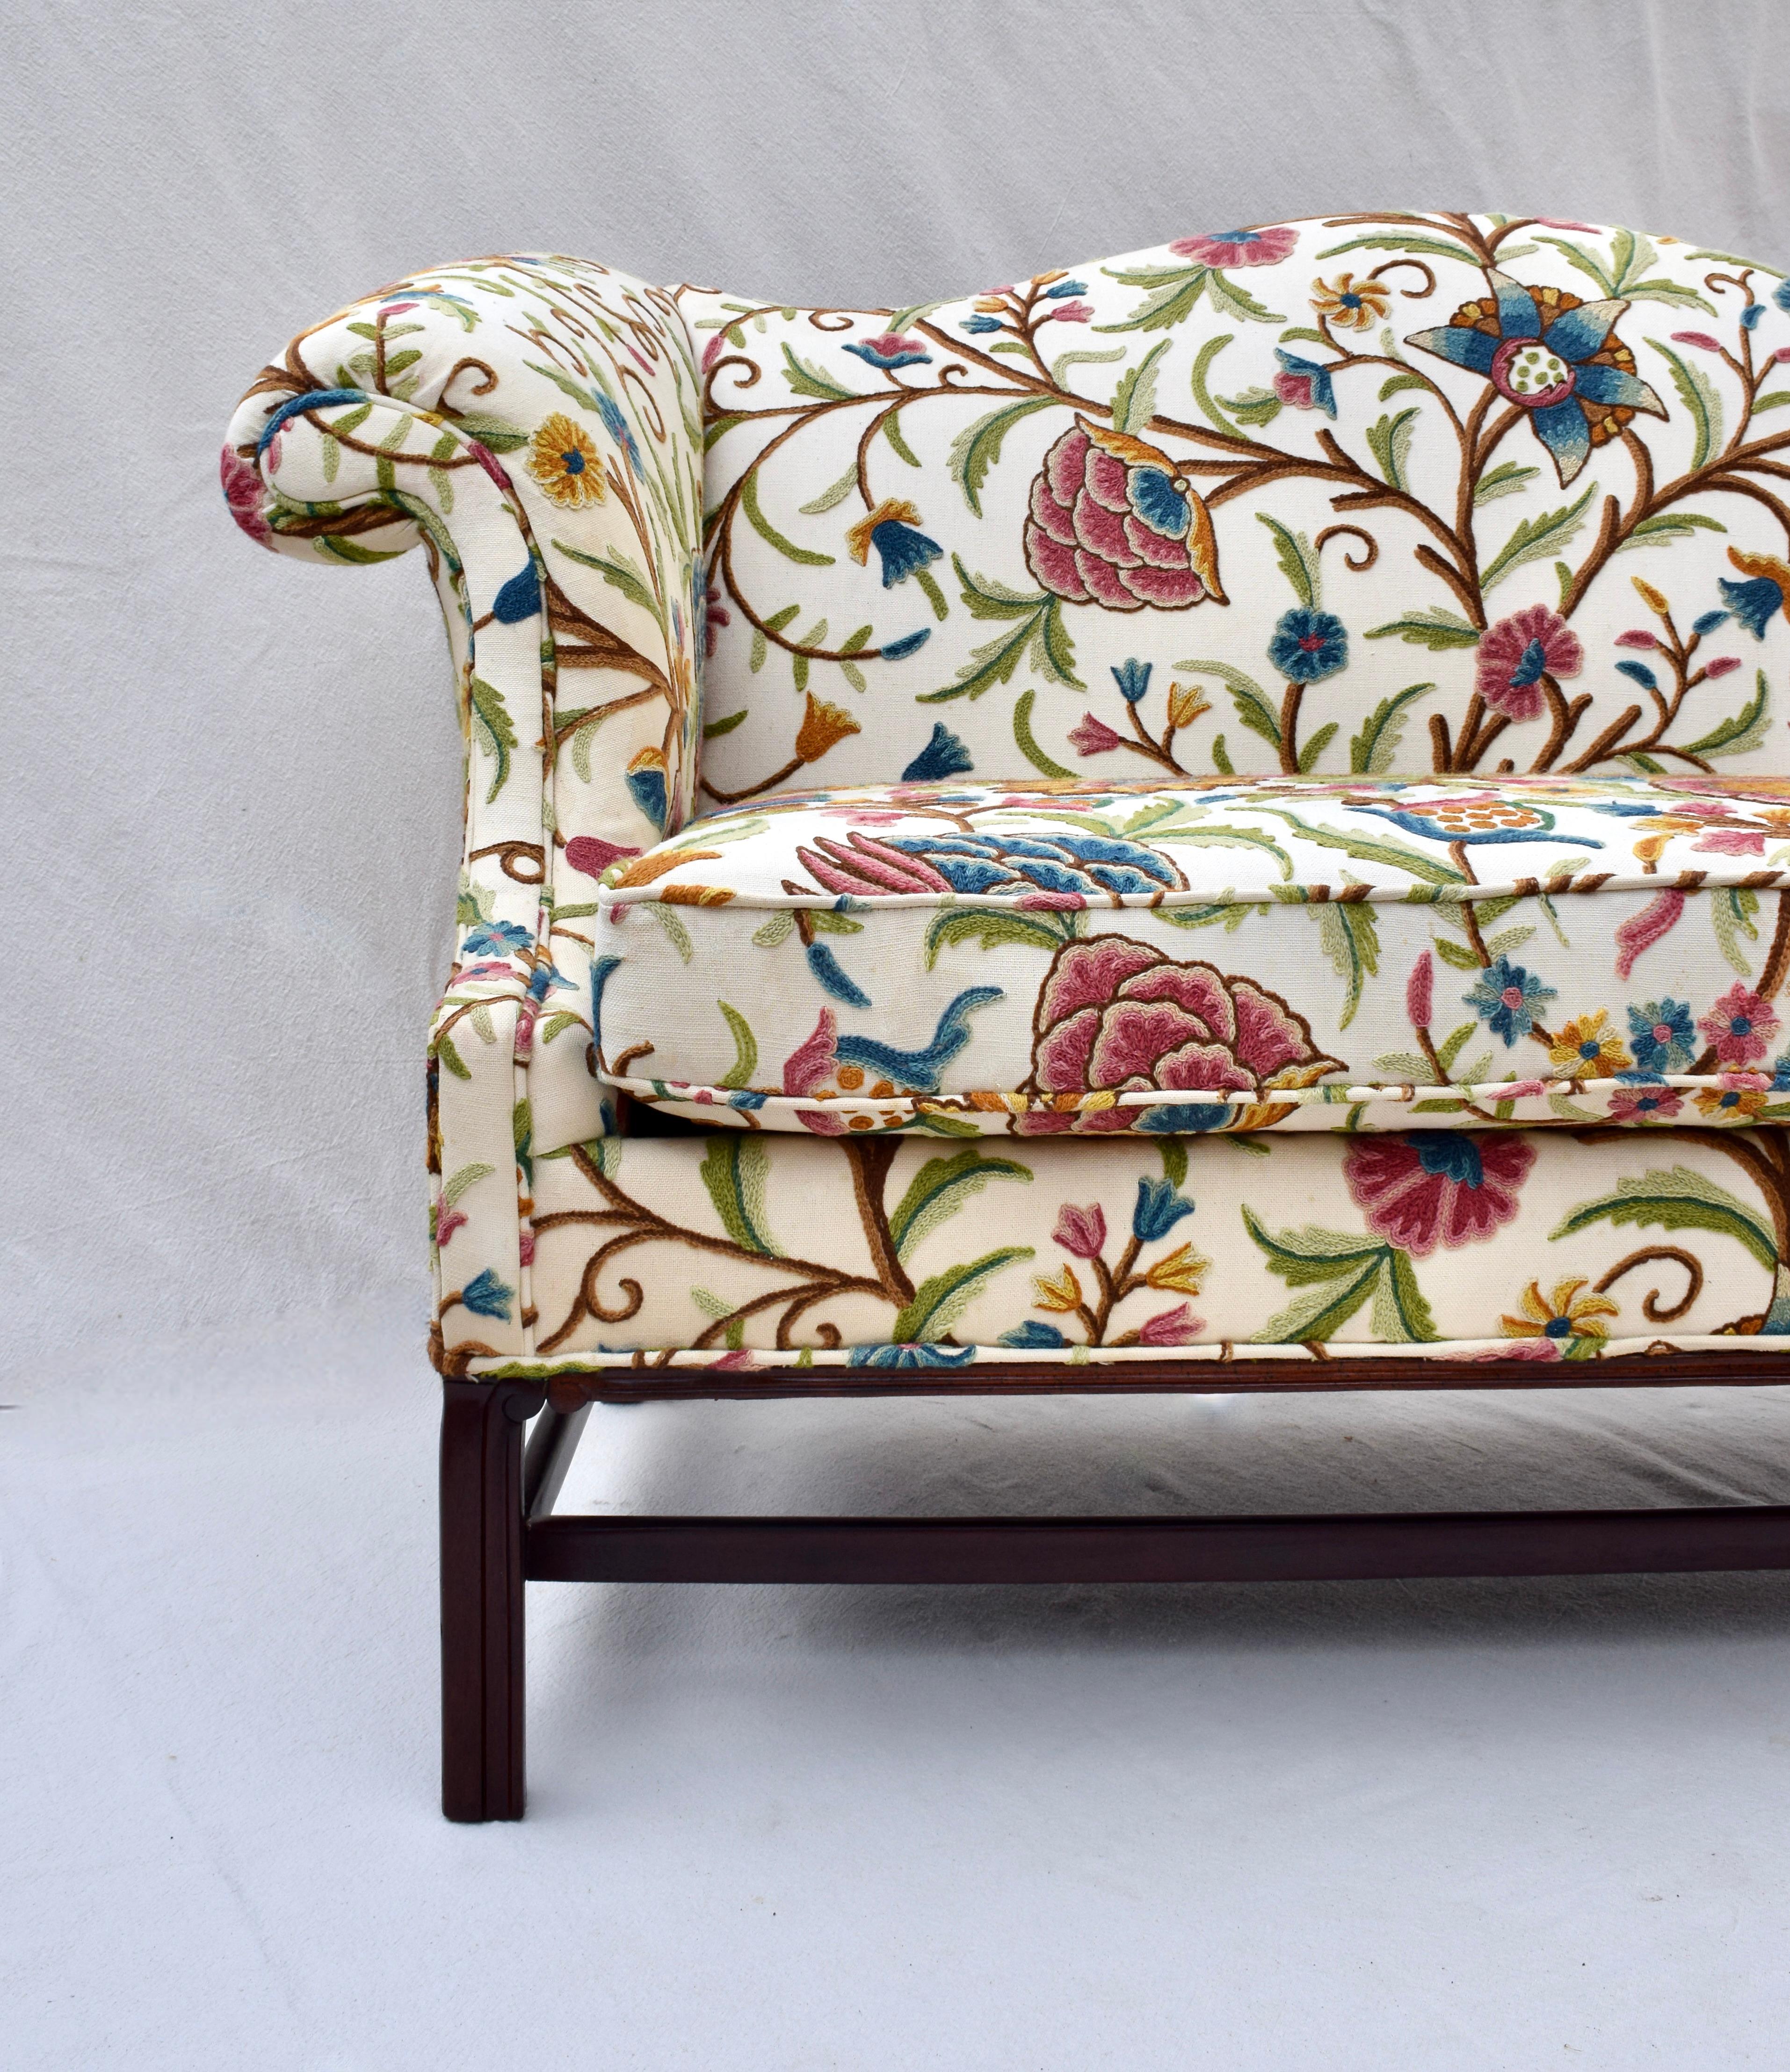 American Edwardian Chippendale Style Loveseat Sofa by Hancock & Moore